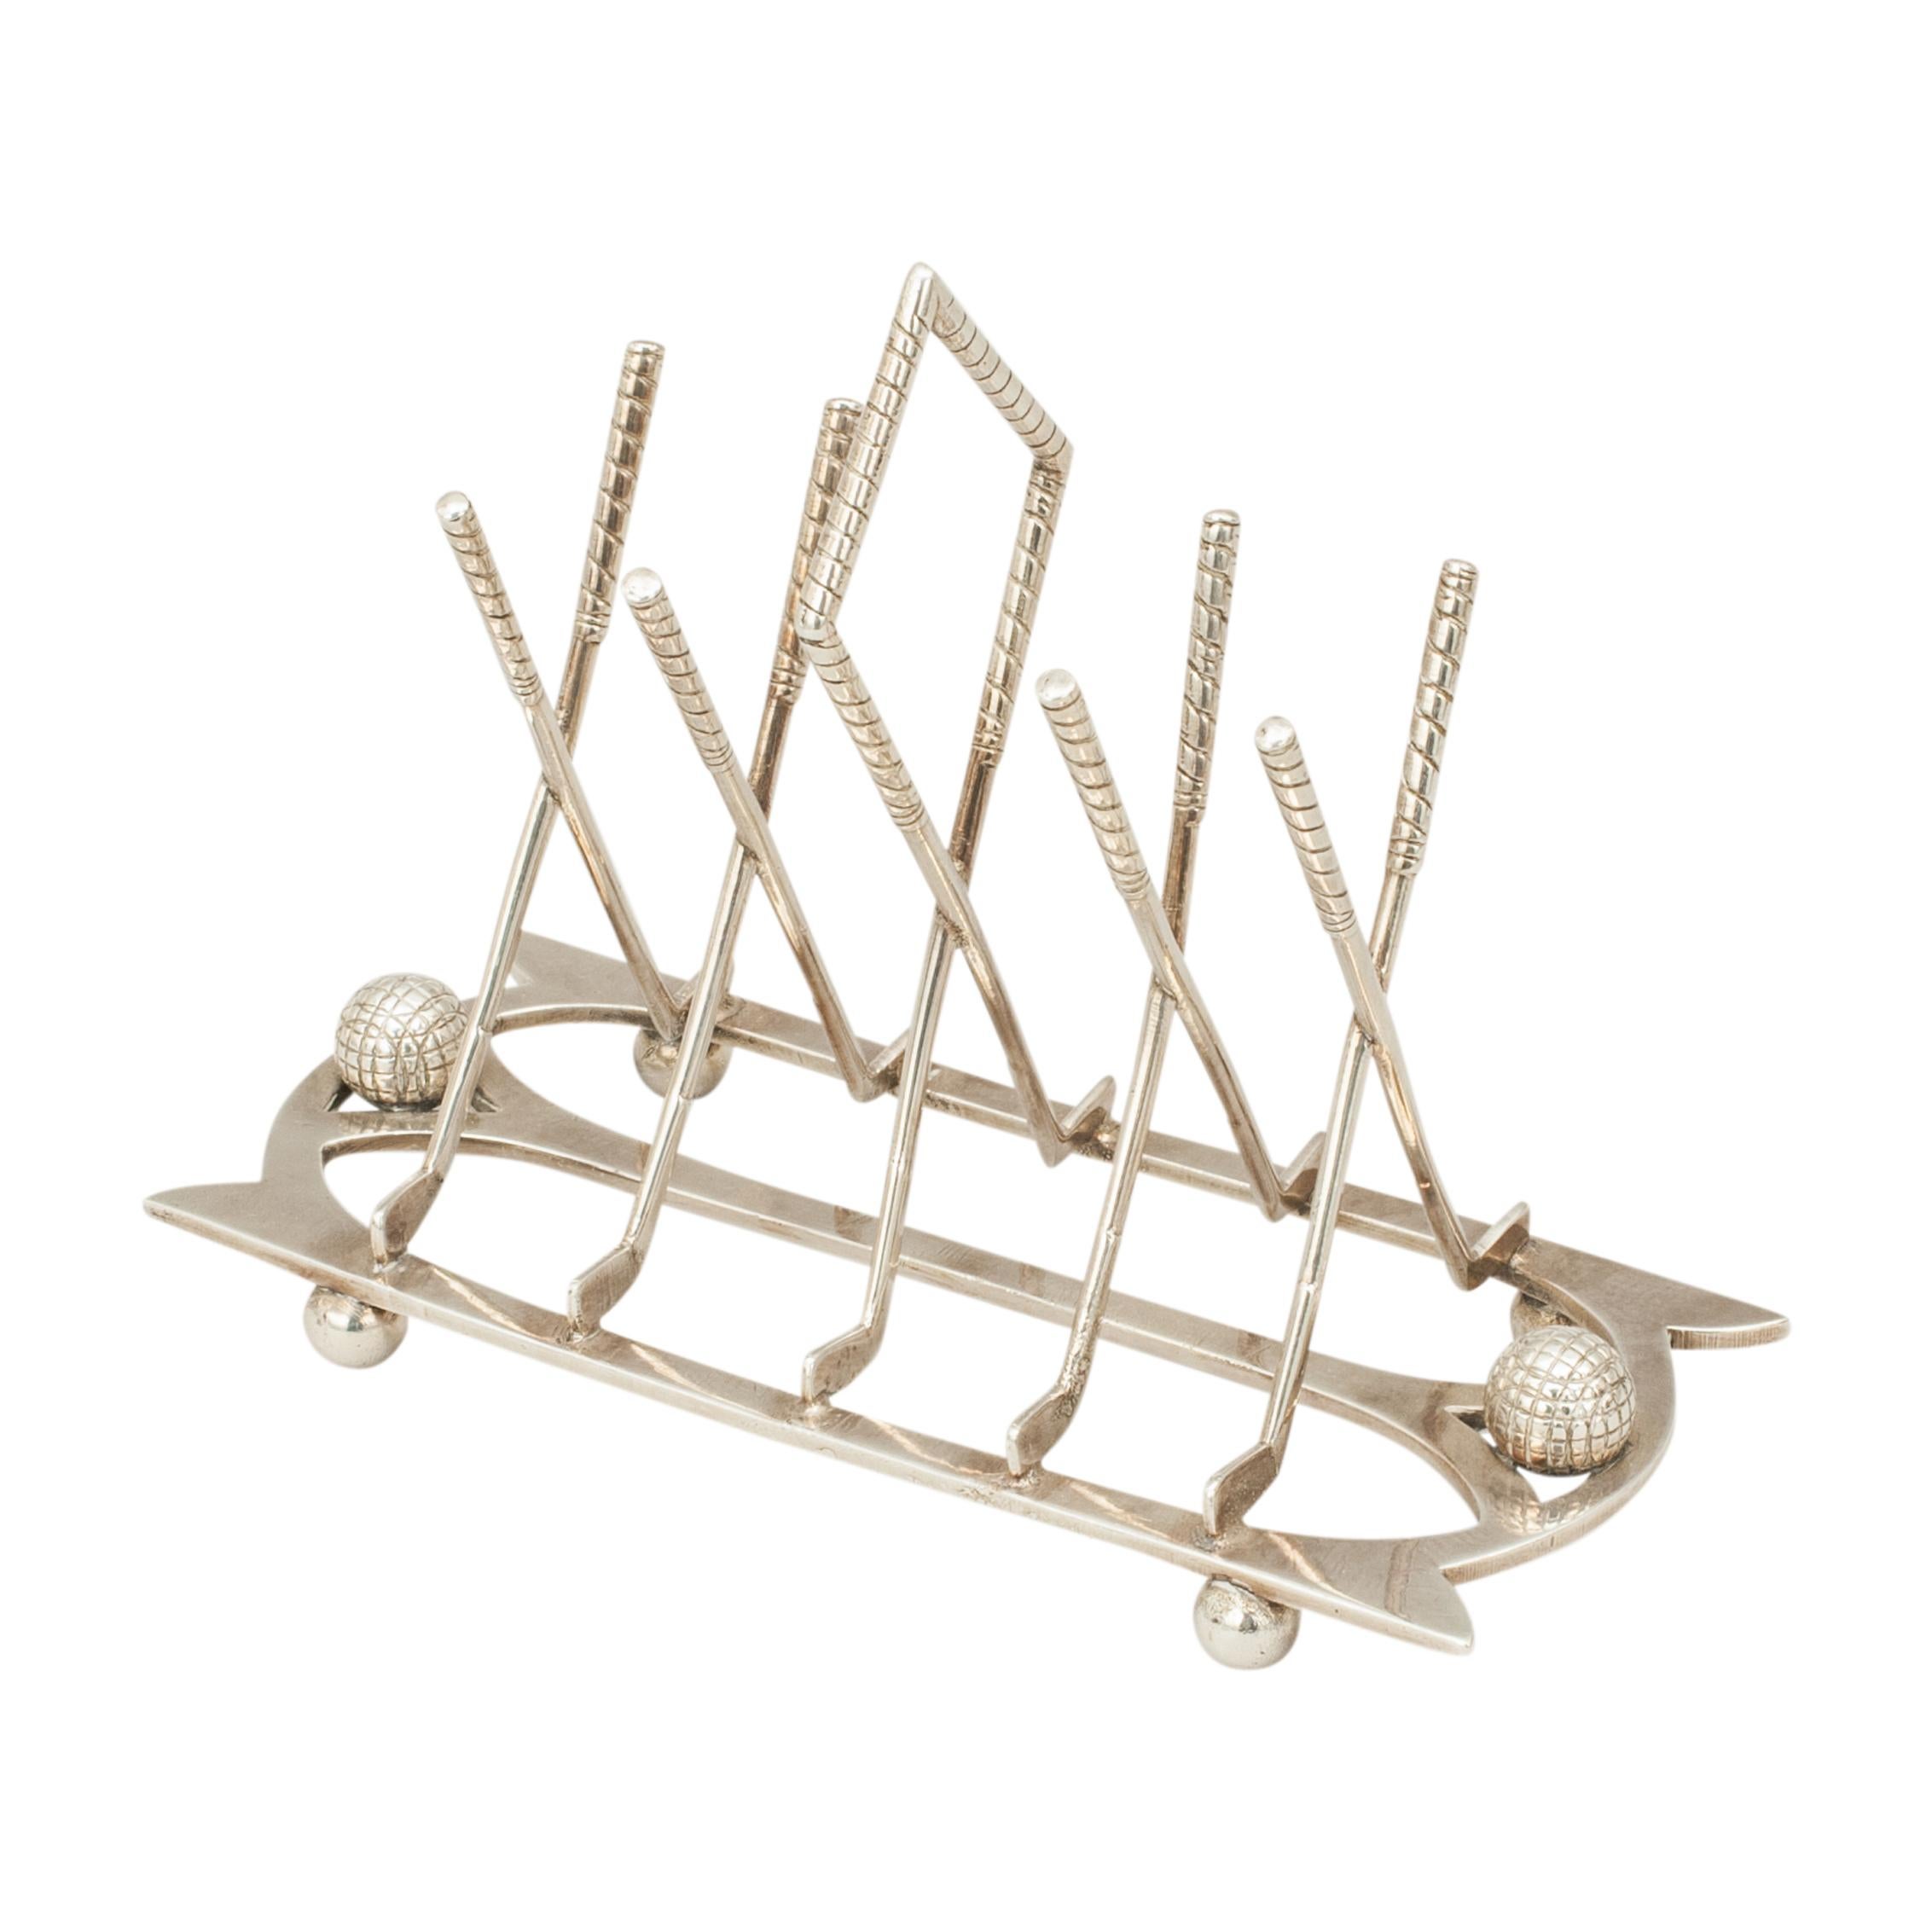 Antique golf toast rack.
A silver plated four division toast rack with crossed golf clubs, mounted on a shaped base, raised on tiny bun feet. There is a small gutty pattern golf ball on both ends of the toast rack. Would also work well as a letter